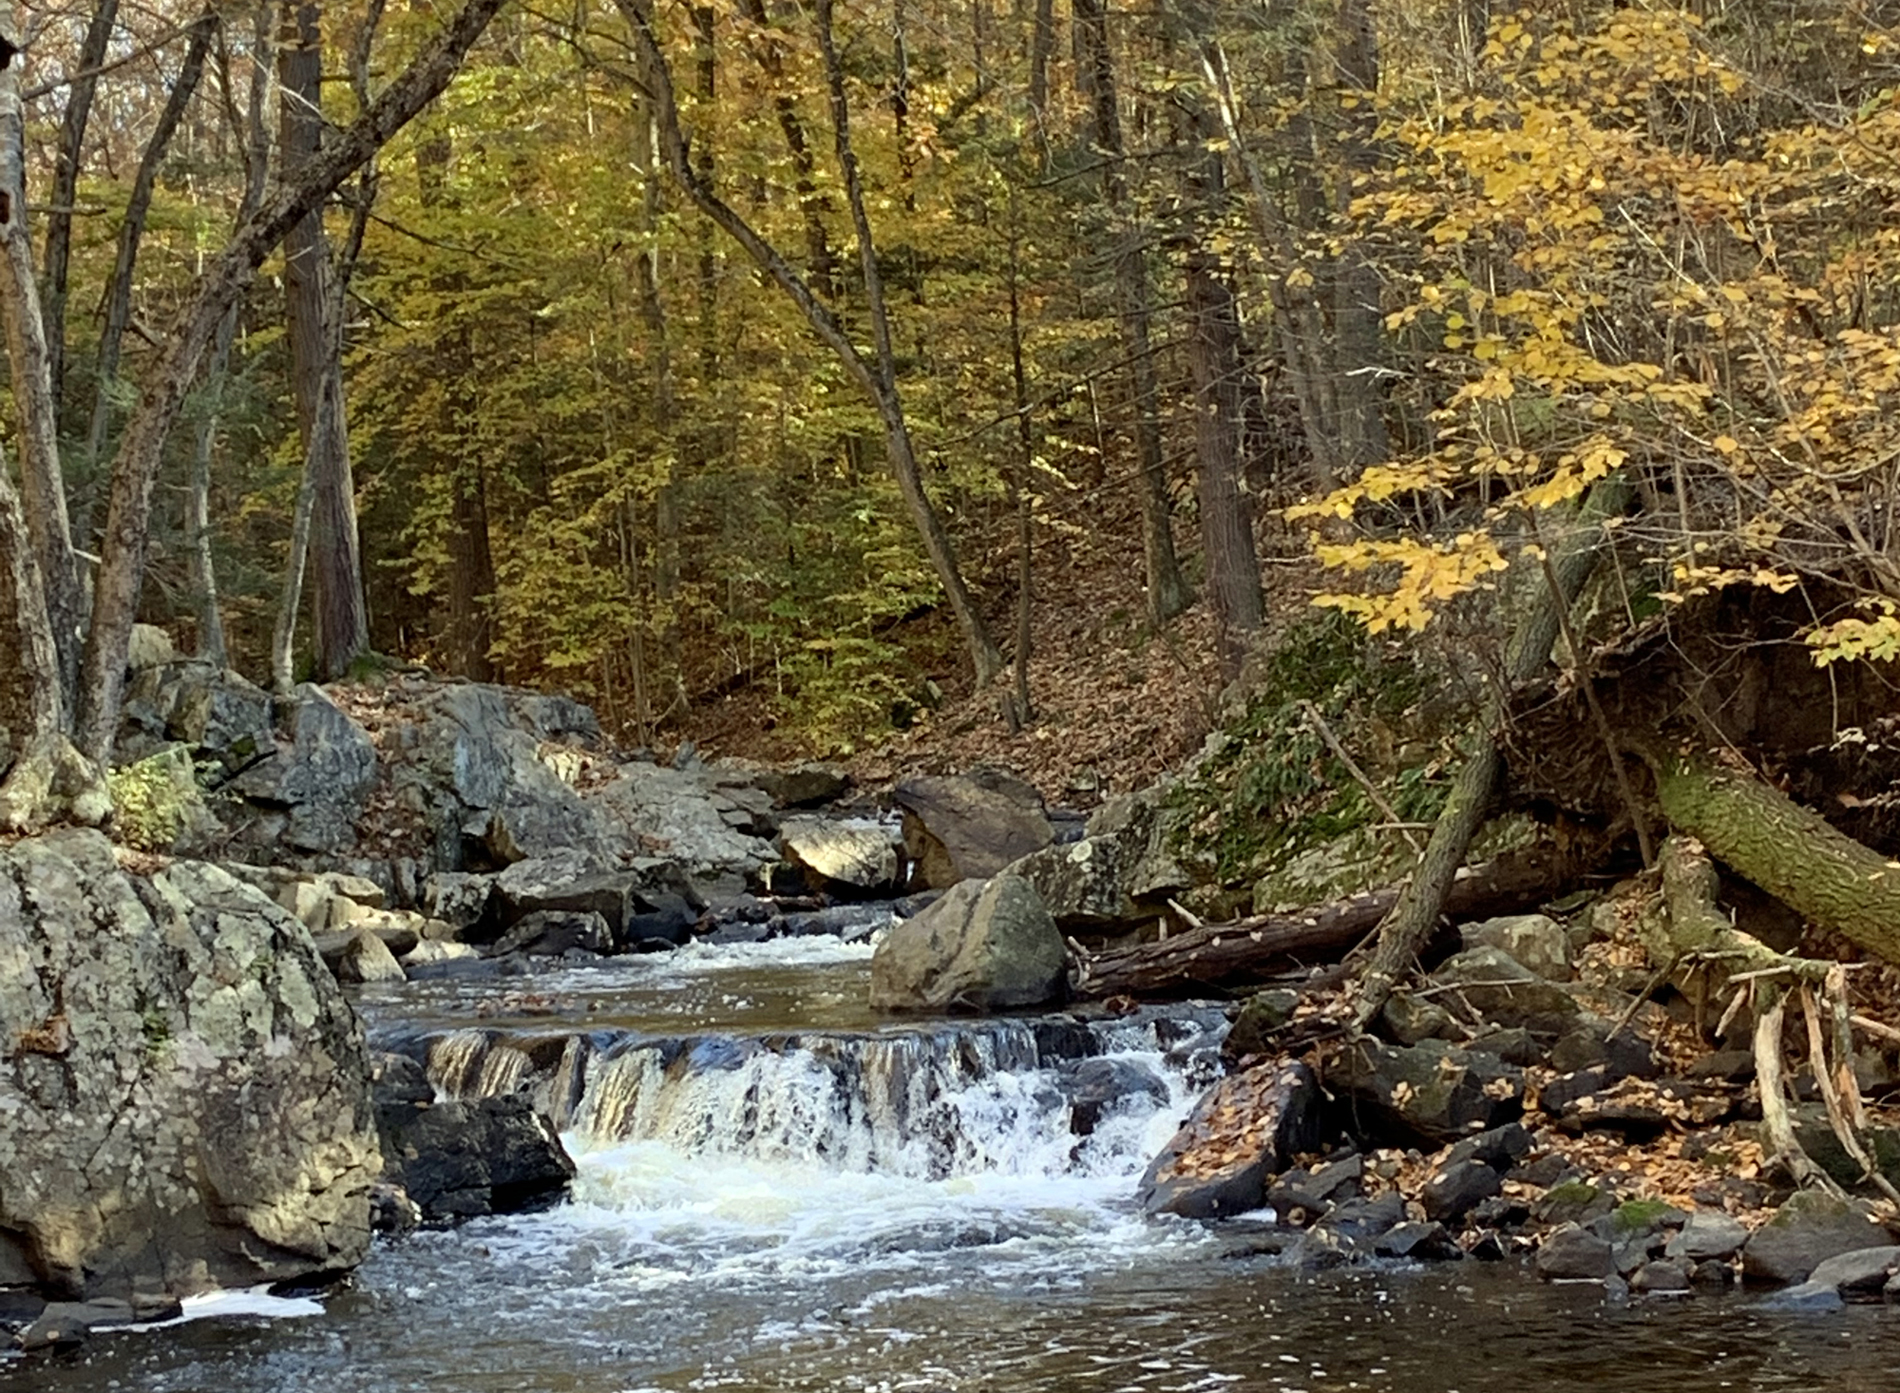 An autumnal view along the Lamington River in Hacklebarney State Park on the border of Chester Twp. and Washington Twp. (Morris County). Photo by Dave Robinson.